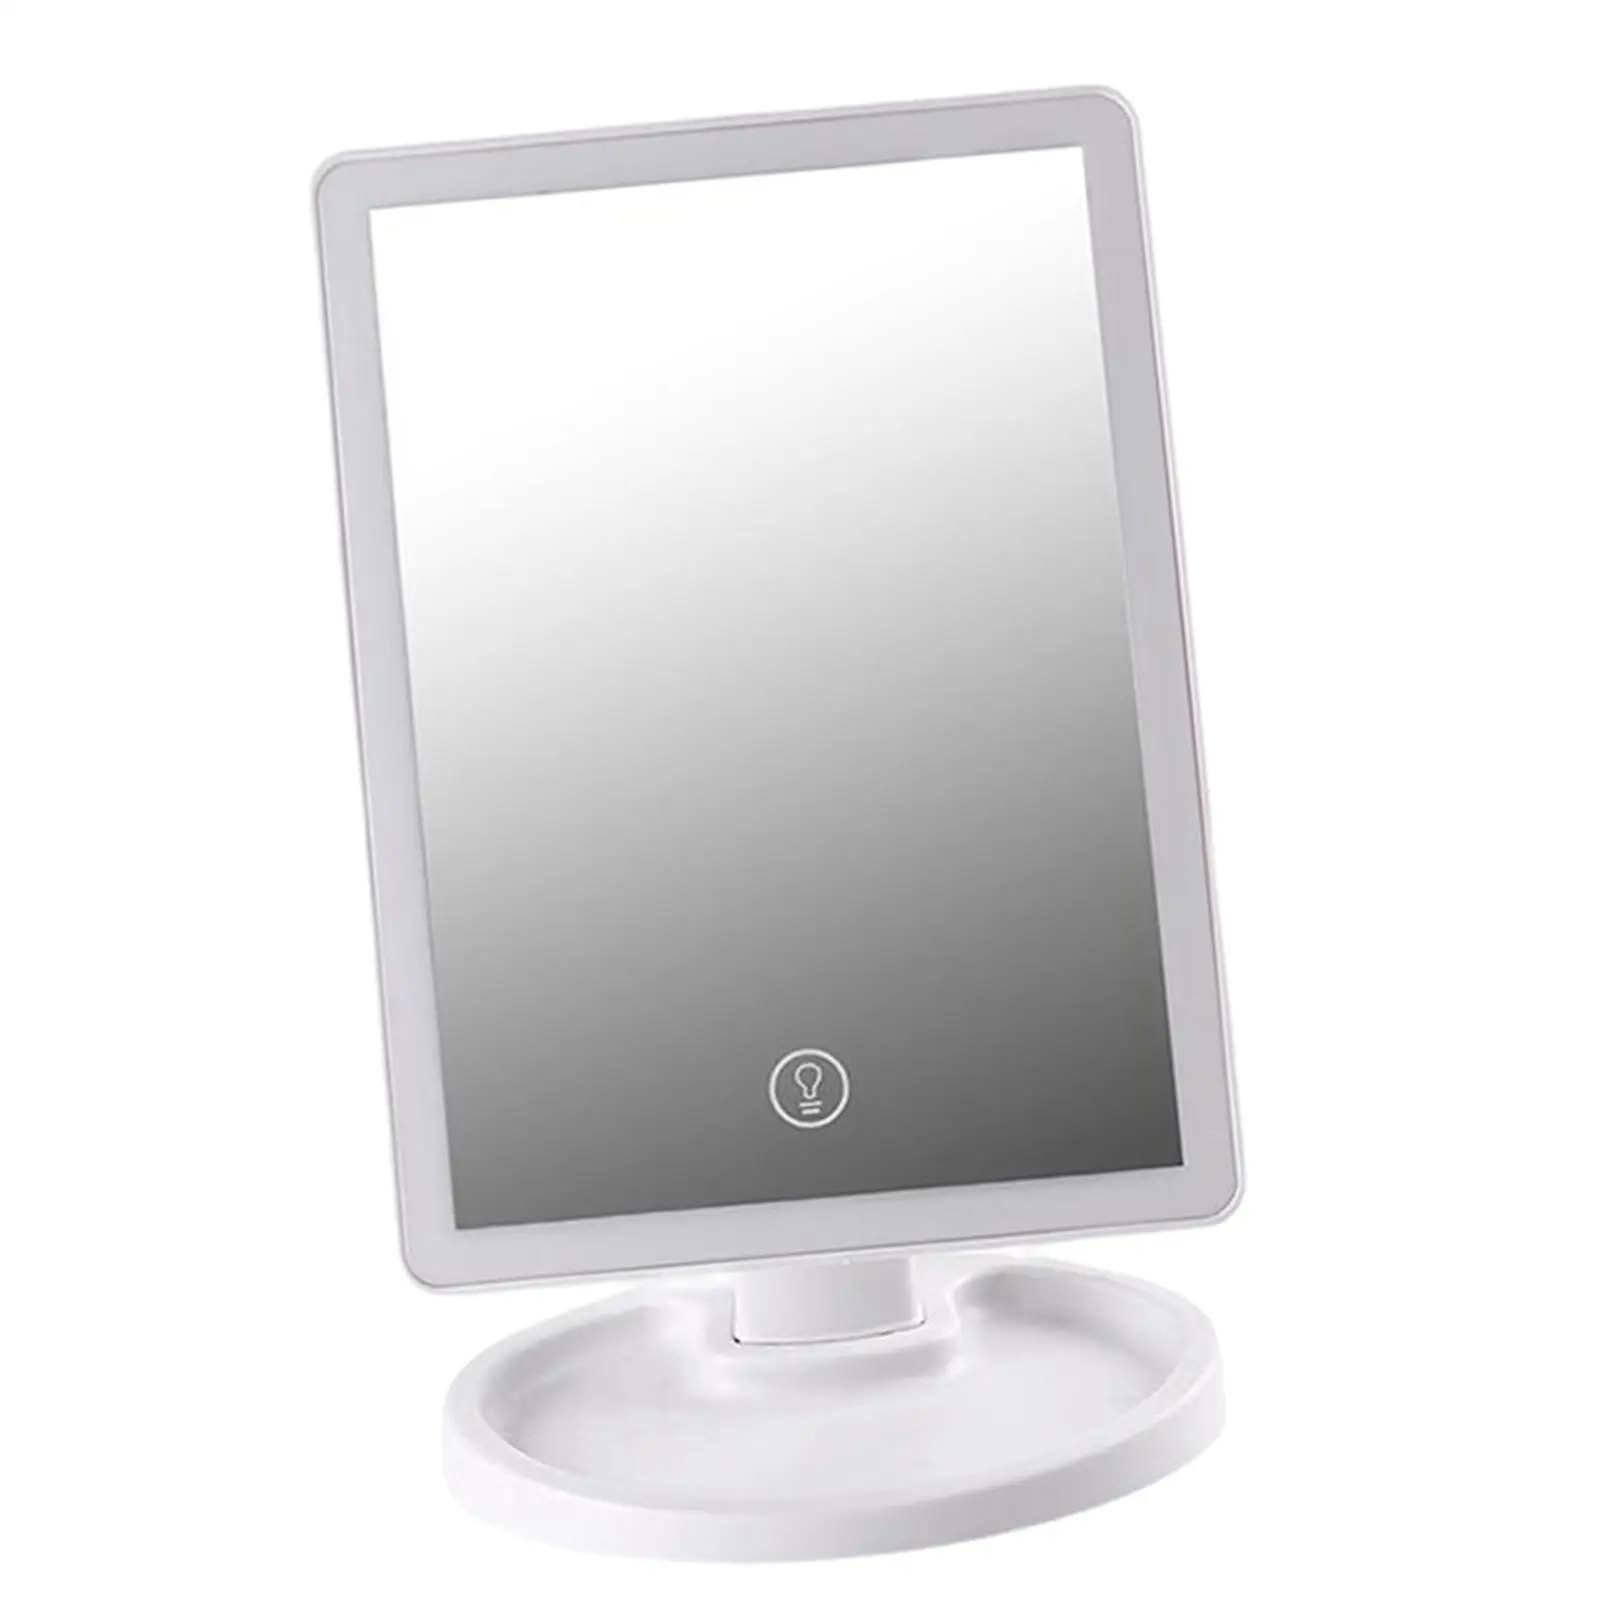 Makeup Mirror with Lights Rechargeable Cosmetic Mirror Rotatable Dimmable Lights for Vanity Desk Travel Women Girls Gift